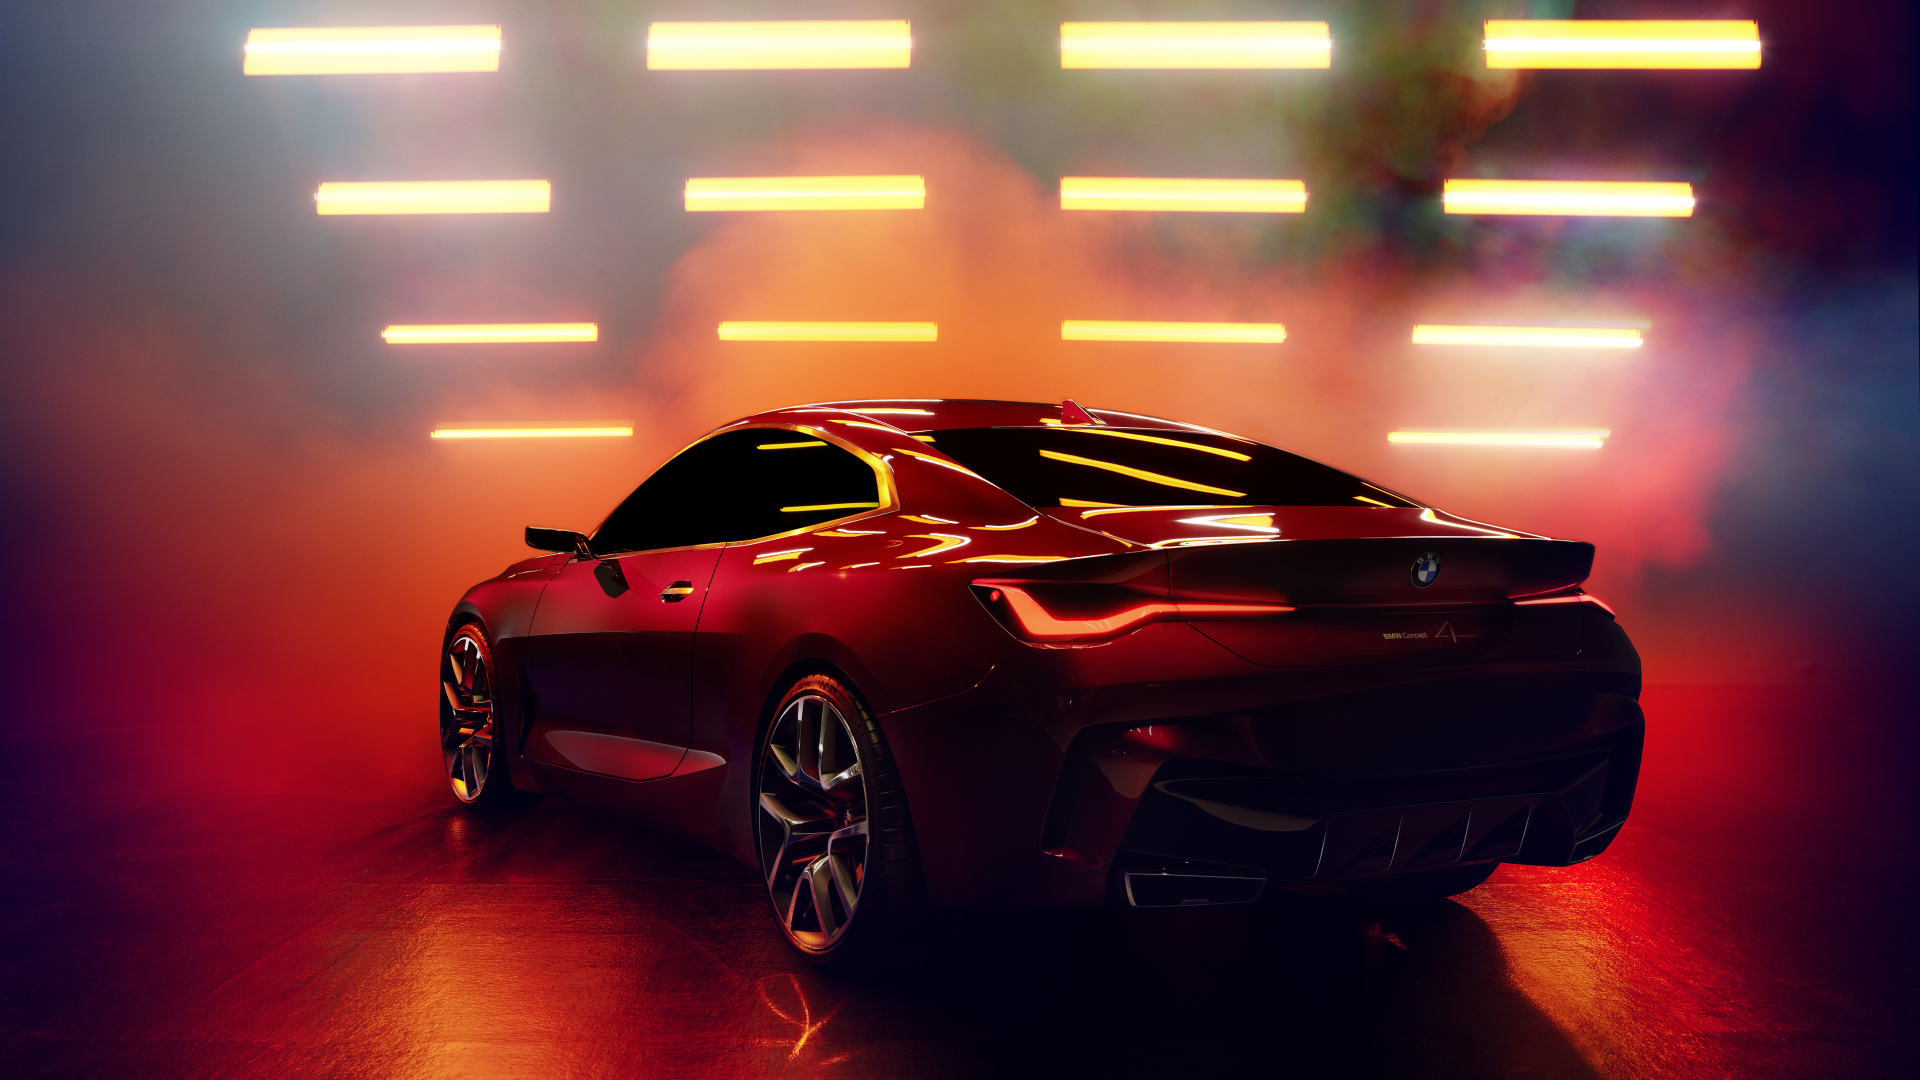 Download 1920x1080 wallpaper motor show bmw concept 4 rear view full 